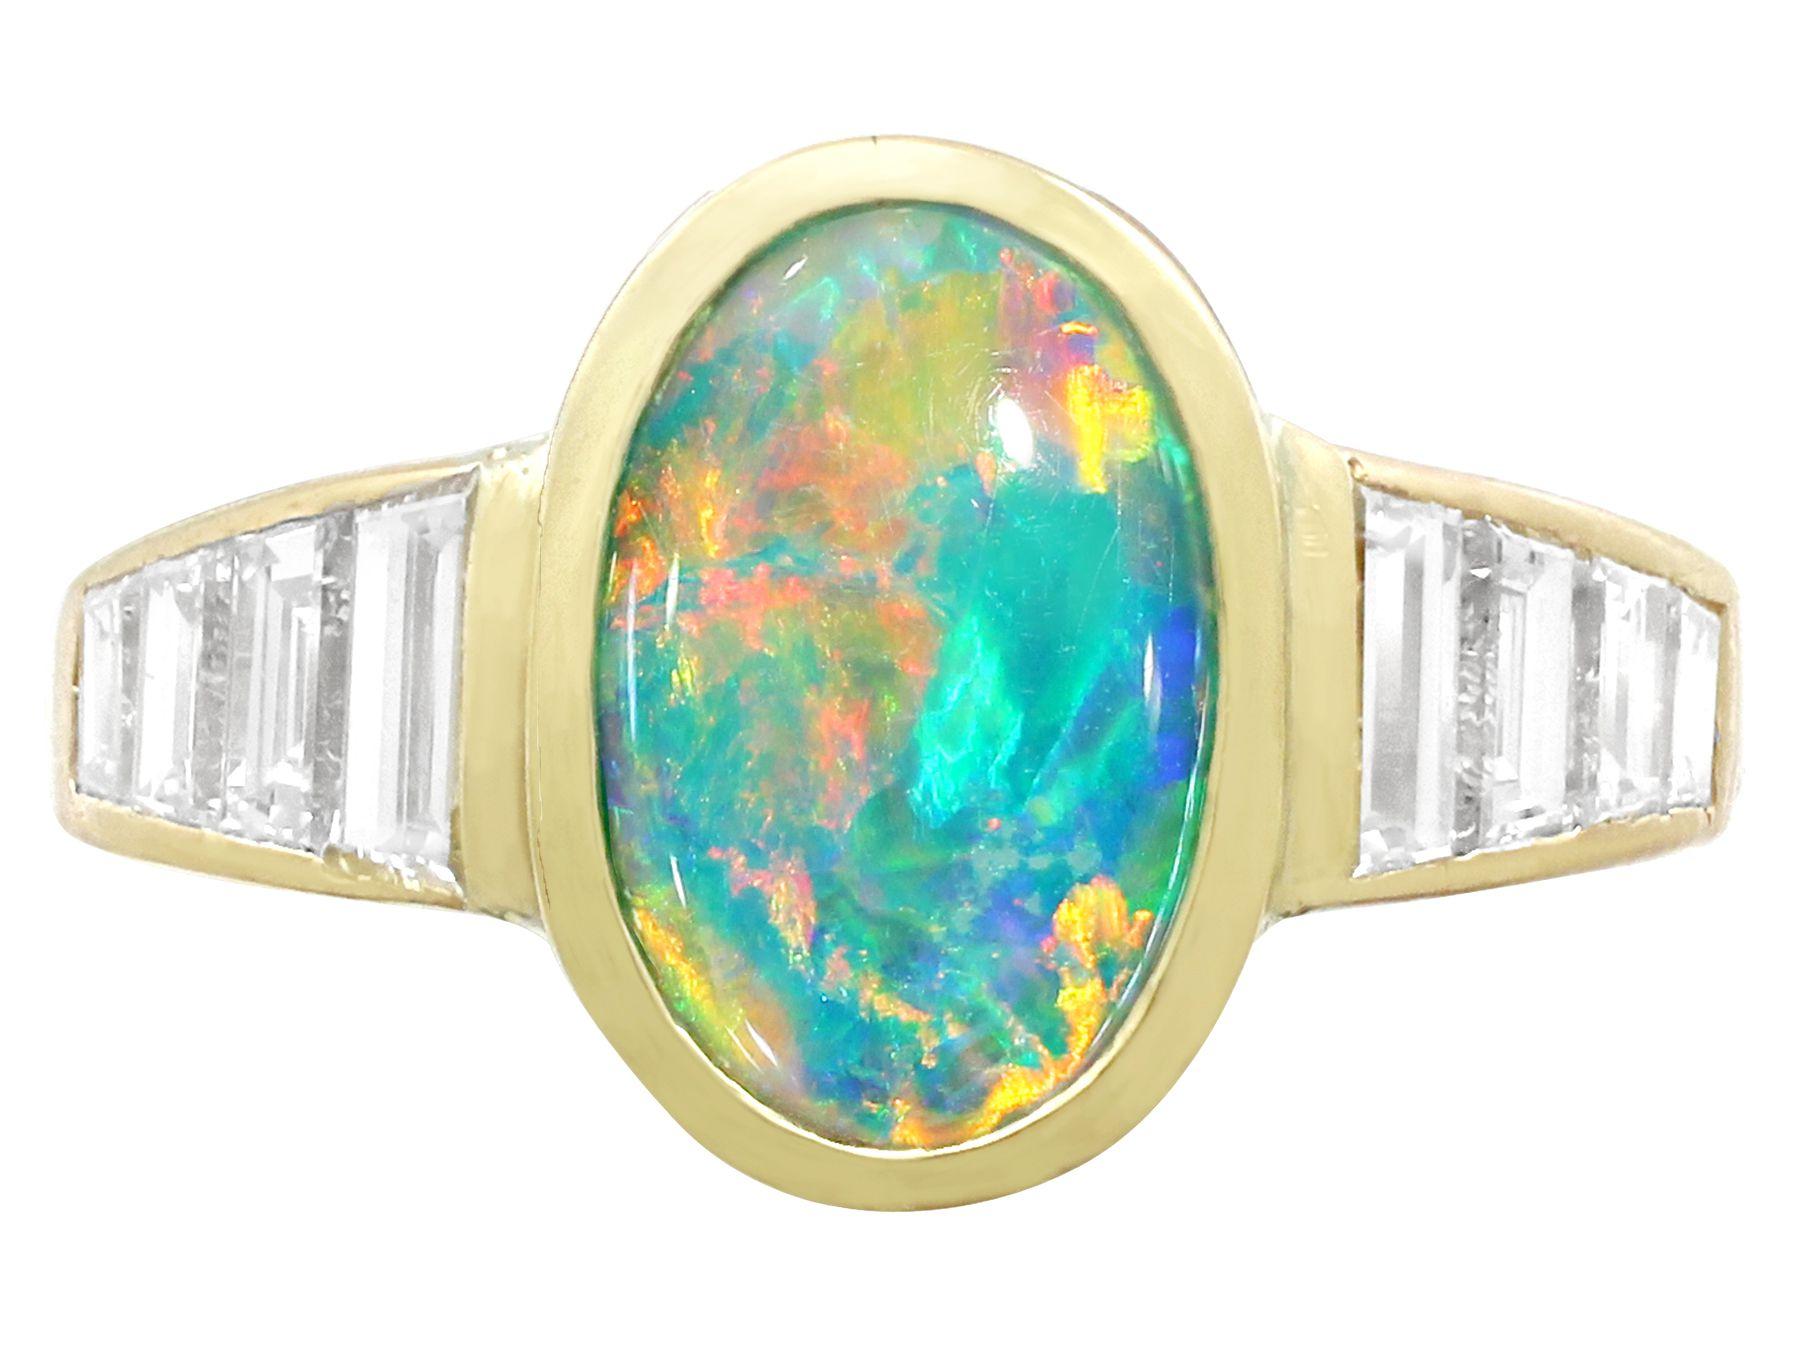 1.40Ct Cabochon Blue Opal 1.12 Carat Diamond Yellow Gold Cocktail Ring In Excellent Condition For Sale In Jesmond, Newcastle Upon Tyne